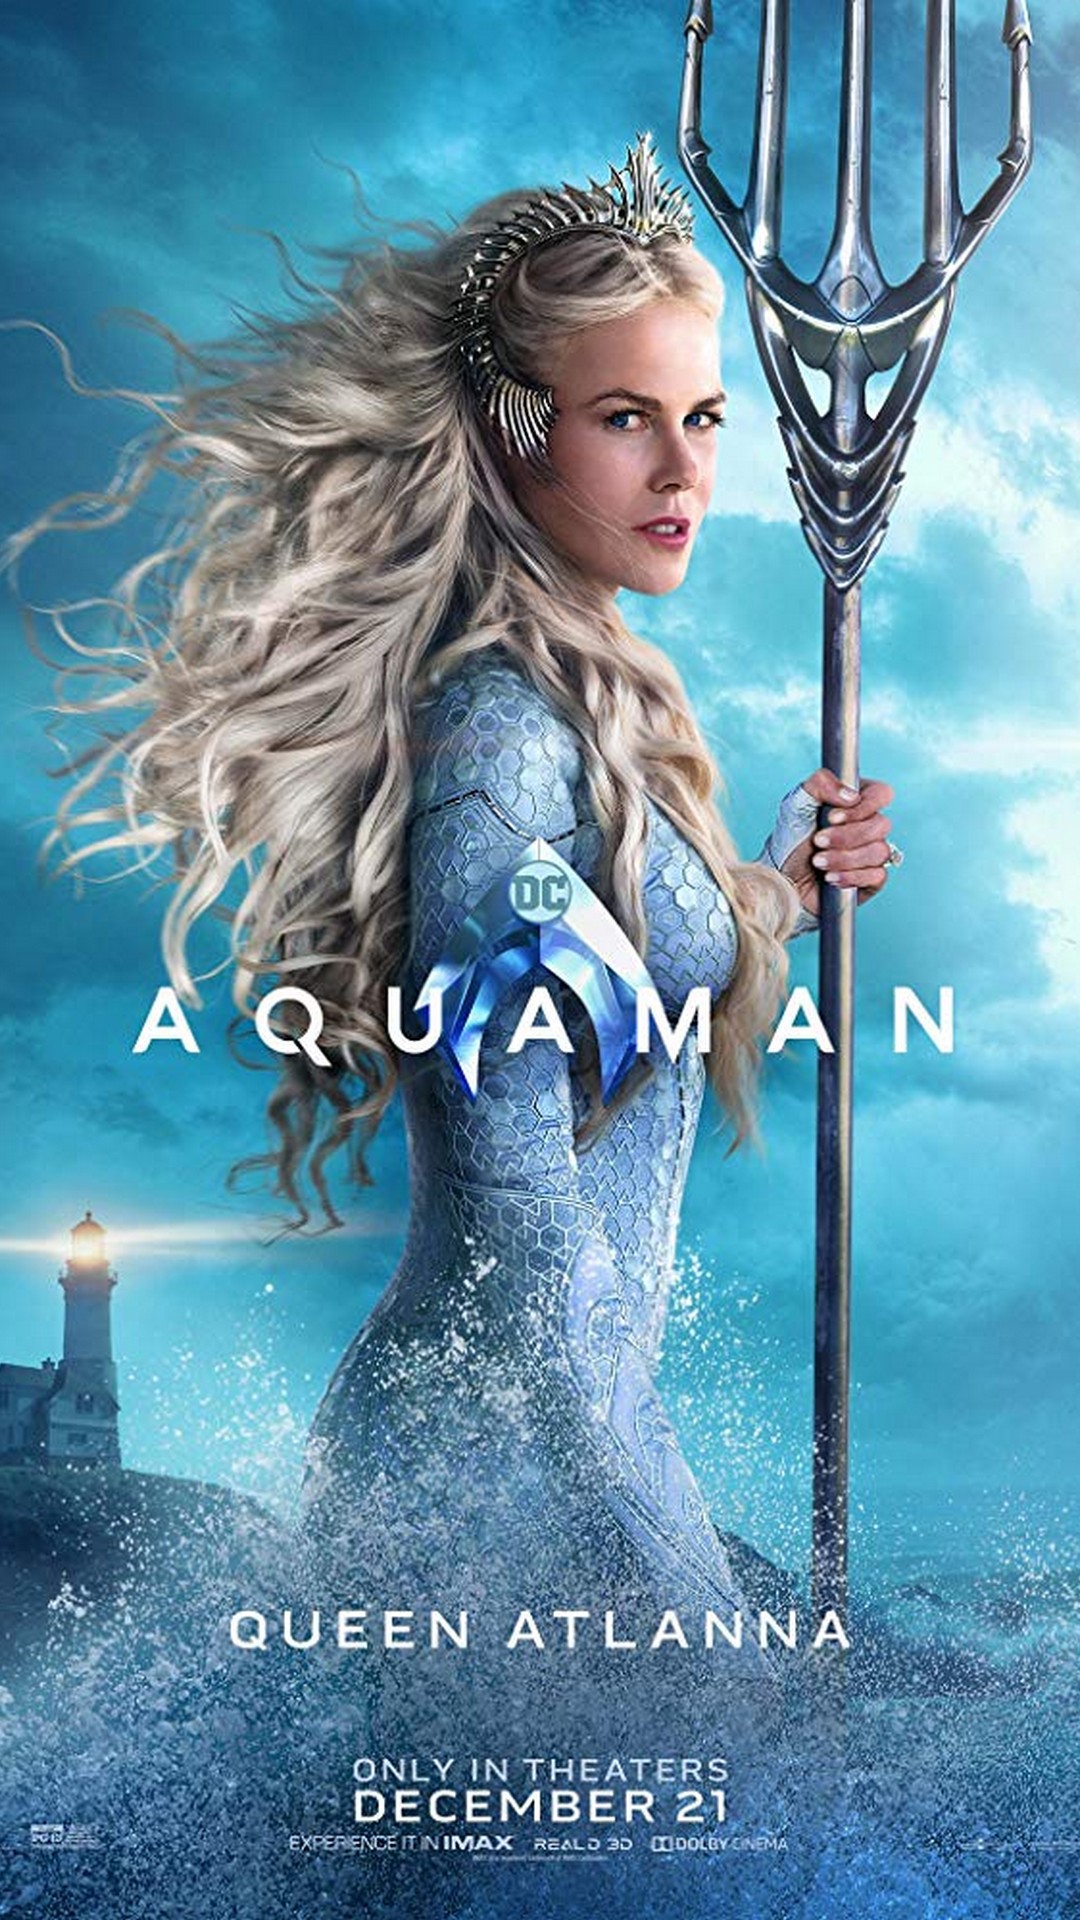 Aquaman 2018 HD Wallpapers For Android with image resolution 1080x1920 pixel. You can make this wallpaper for your Android backgrounds, Tablet, Smartphones Screensavers and Mobile Phone Lock Screen